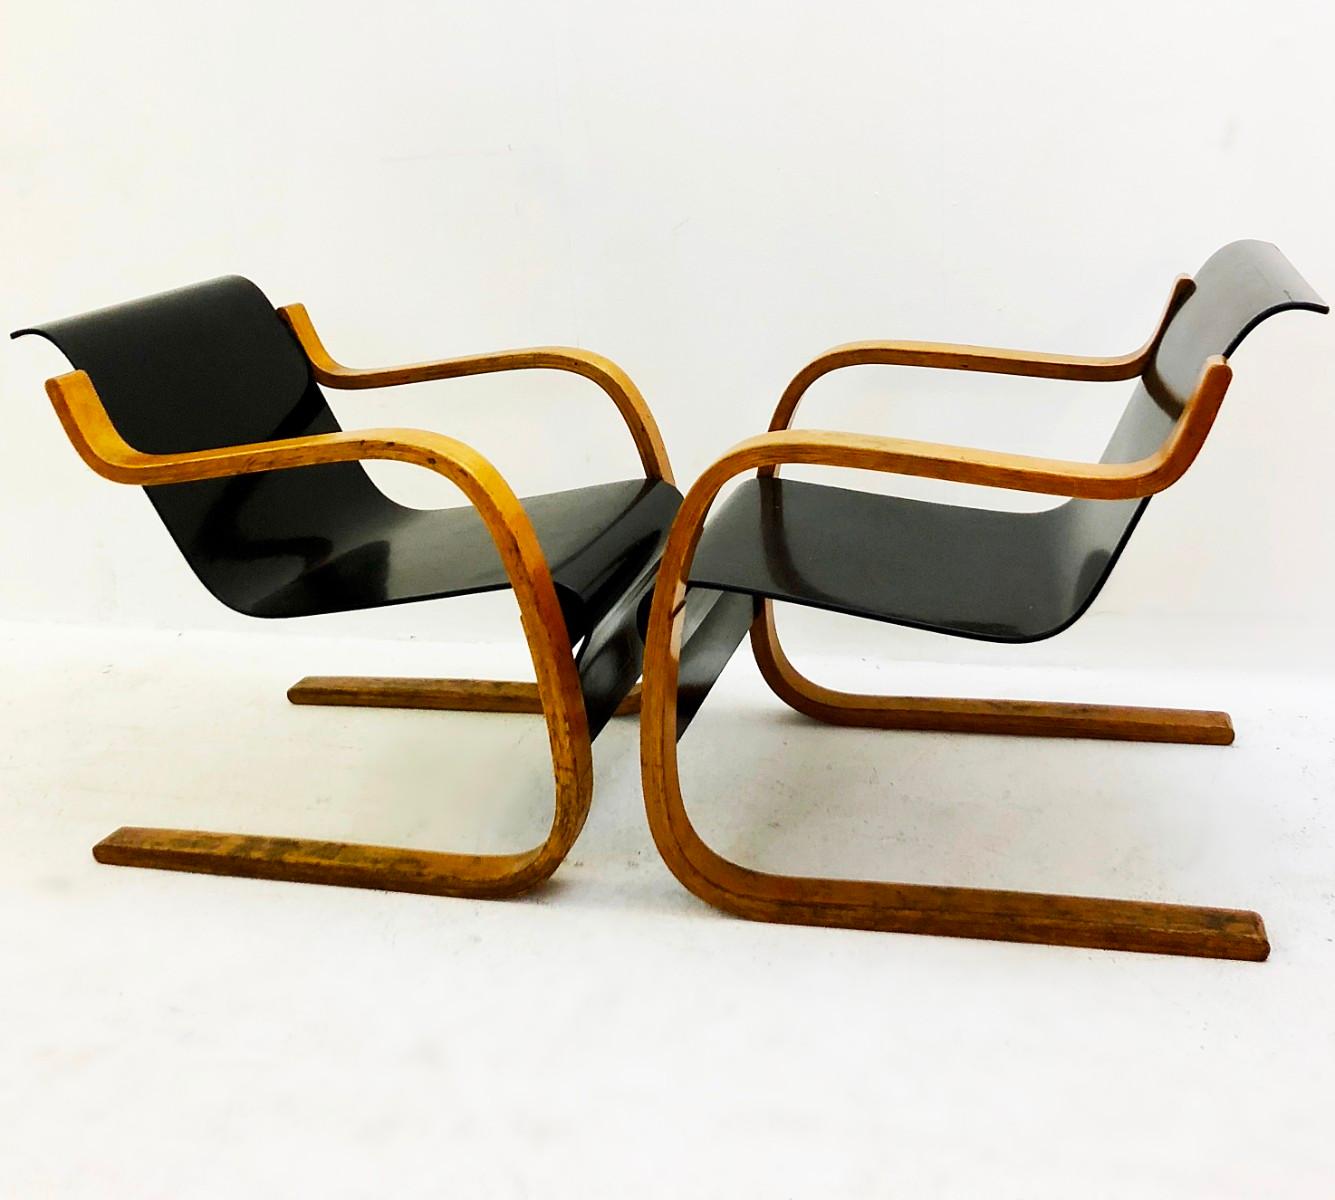 Pair of chairs model 31 in birchwood by Alvar Aalto, Finland, circa 1930s.
 